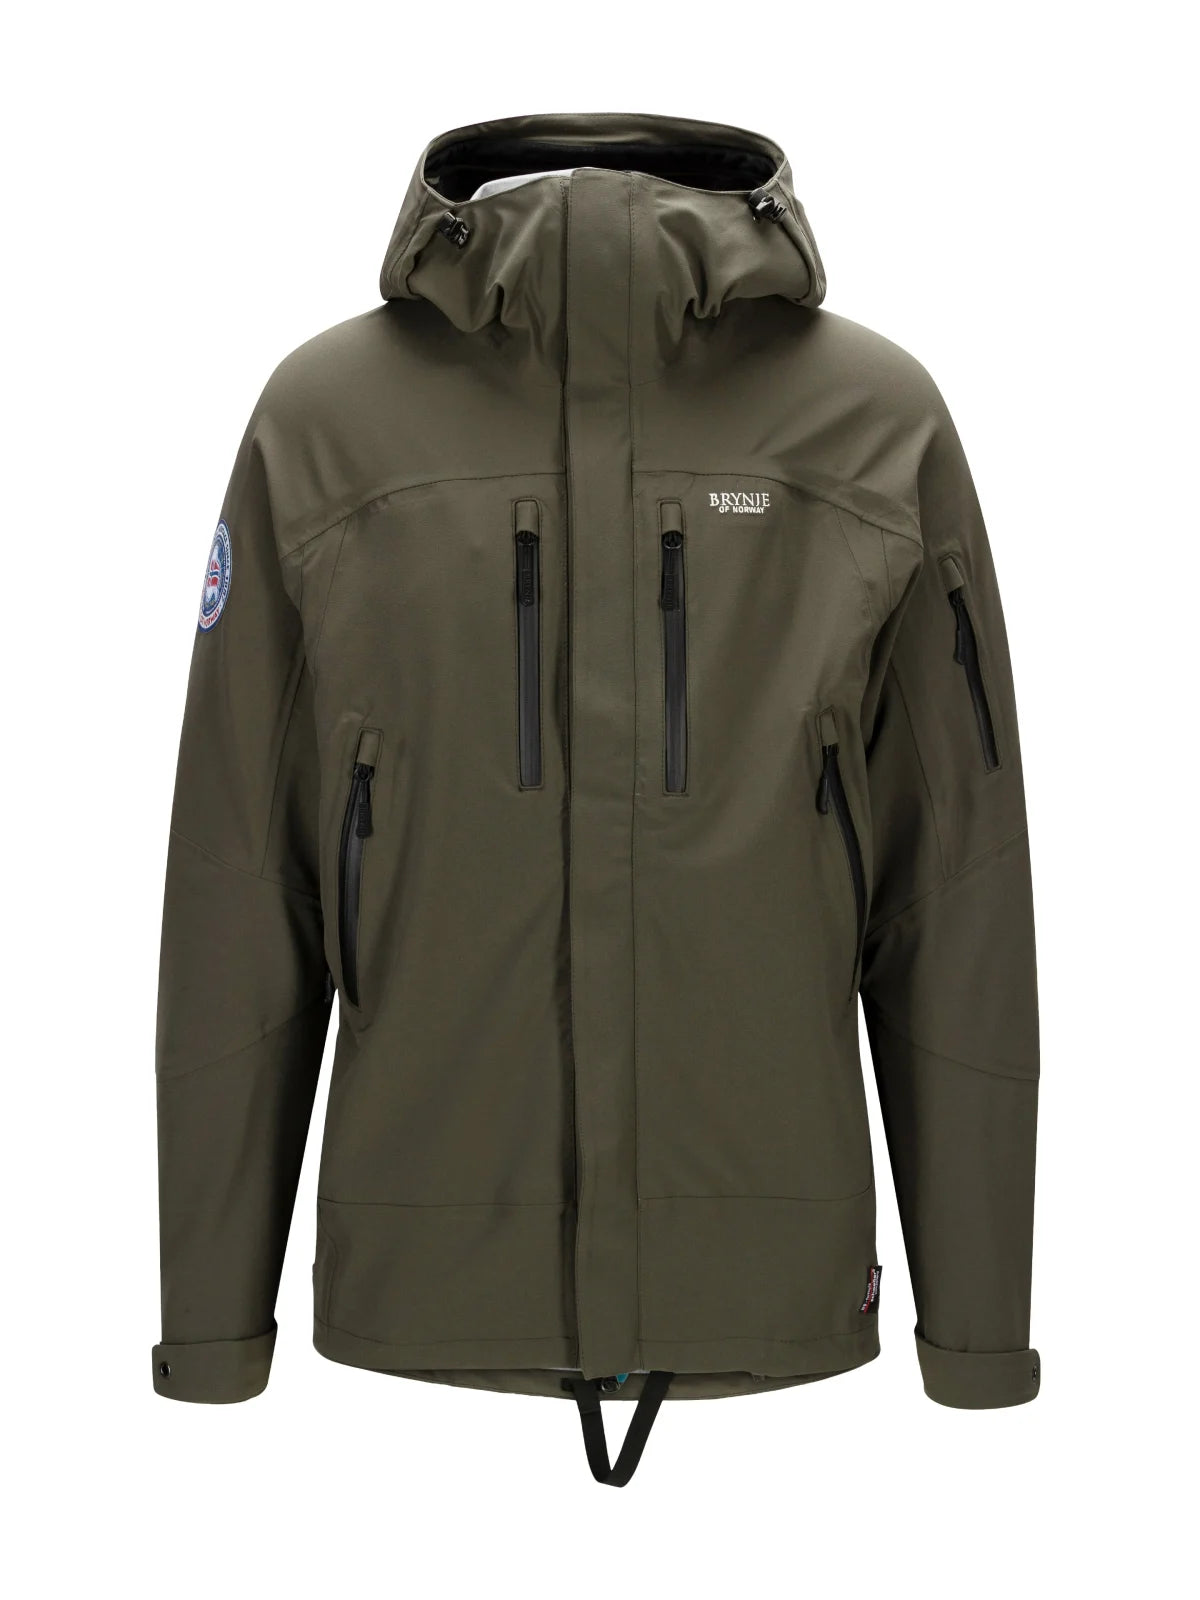 Brynje, Expedition Jacket 2.0 M's, Charcoal green med coyote